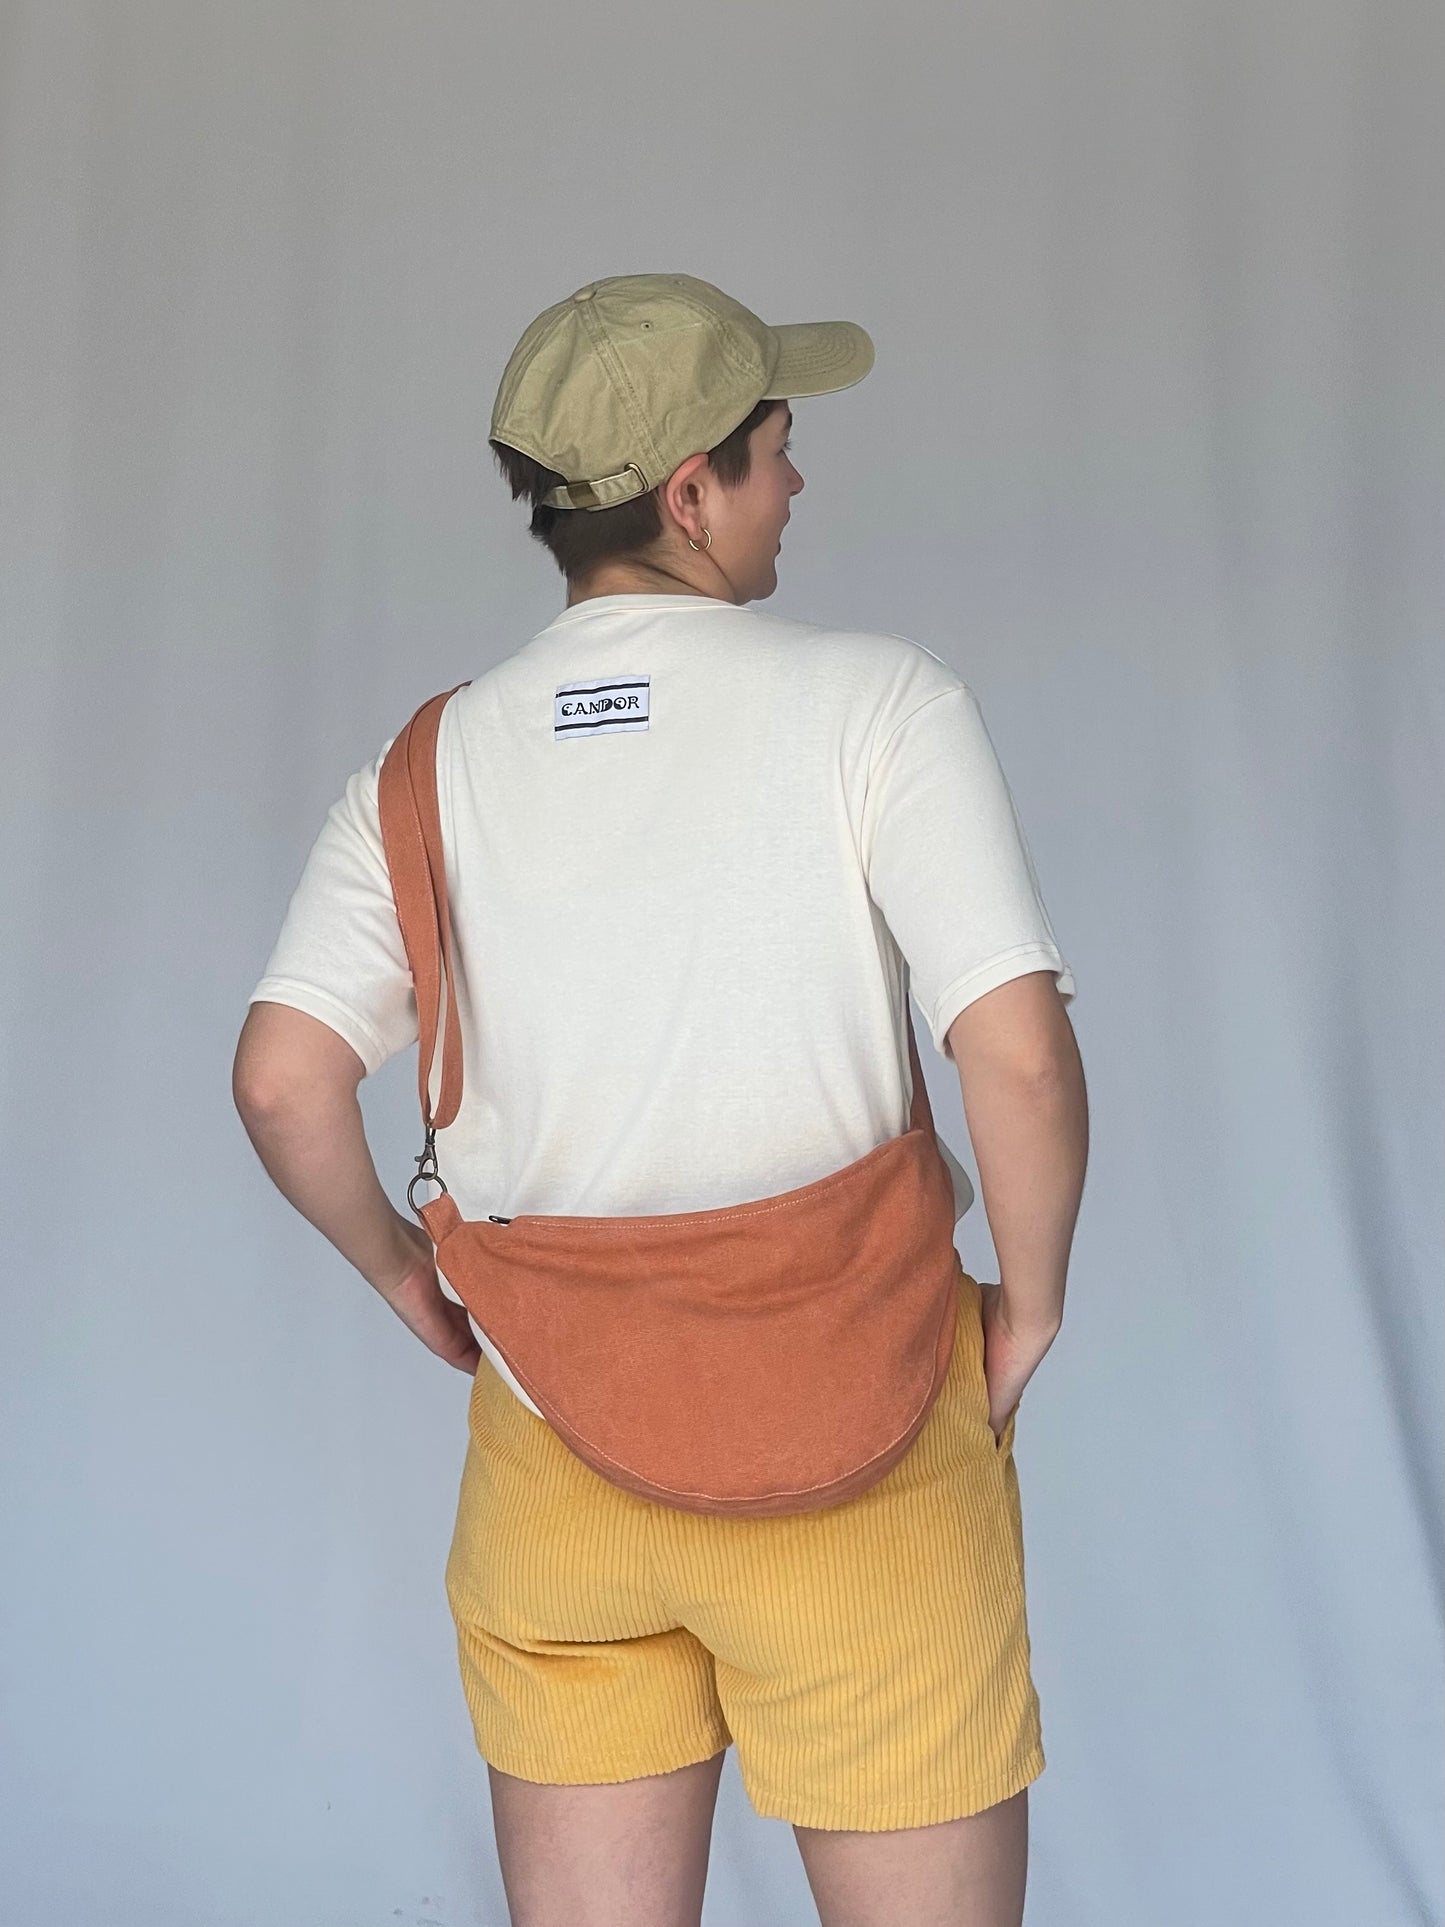 Models wears orange sling bag across body with a cream t-shirt, cap and yellow corduroy shorts against a white backdrop 